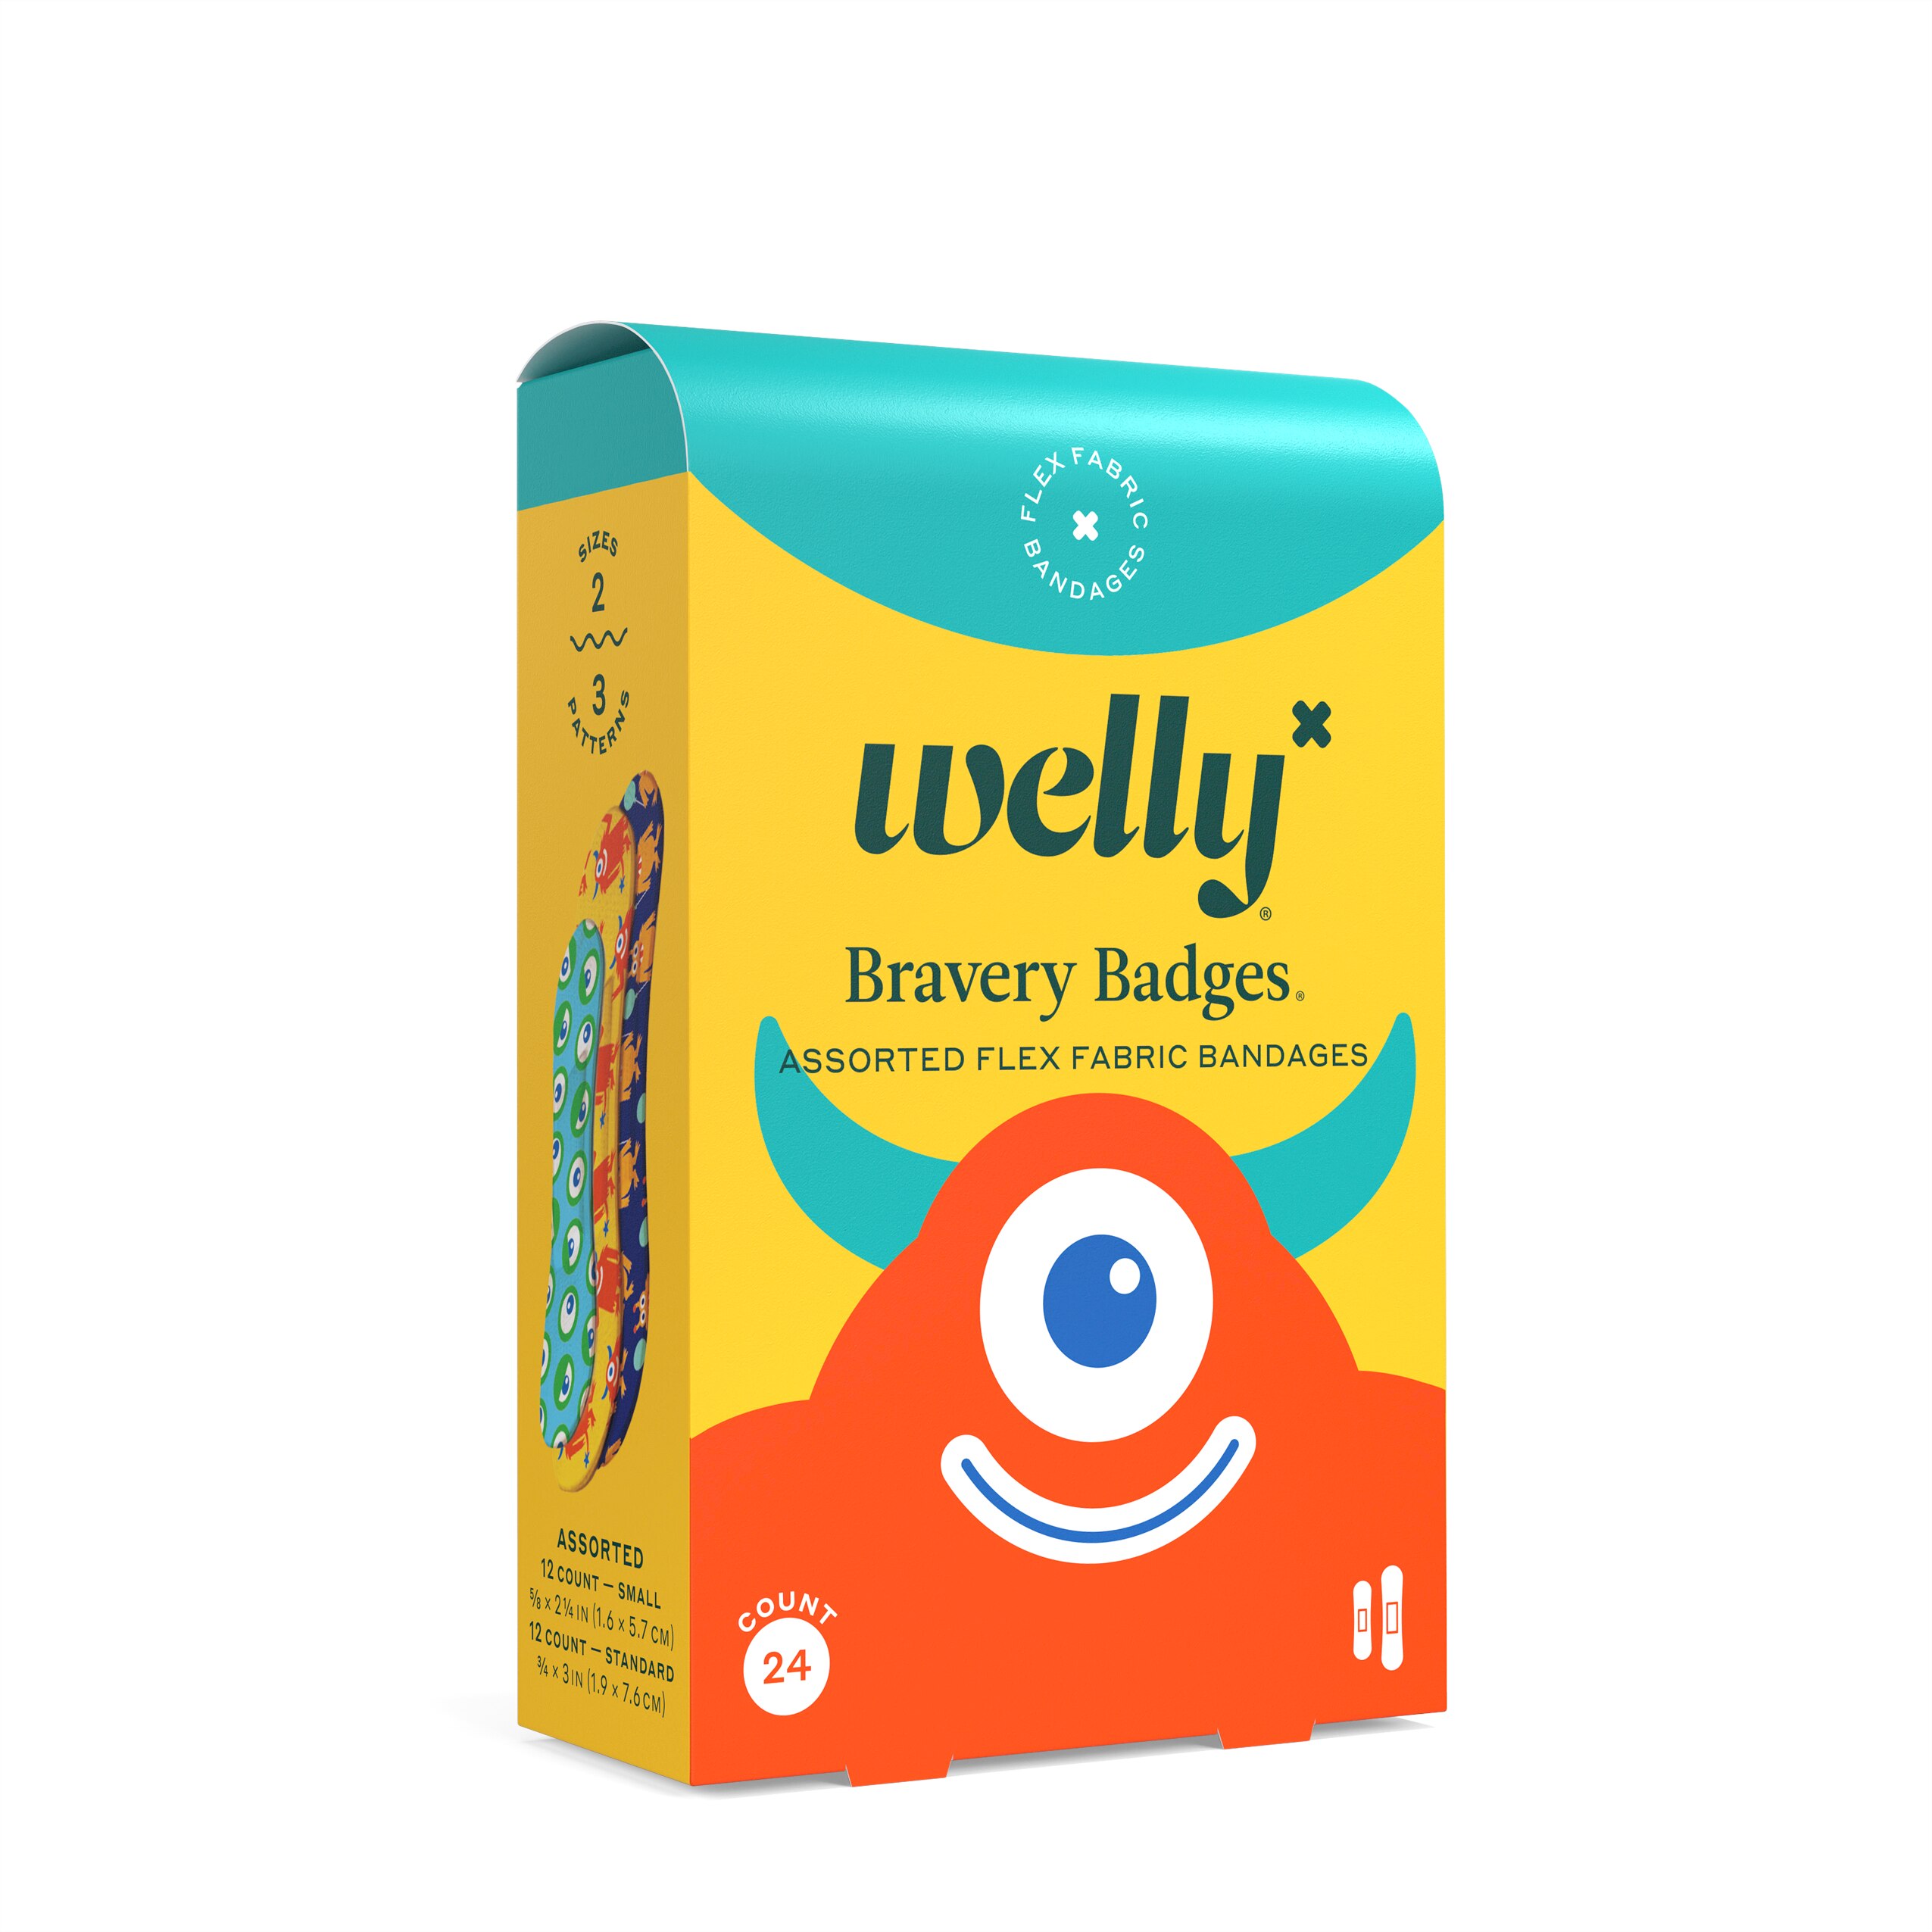 Welly Bravery Badges Monster Carton, 24 CT